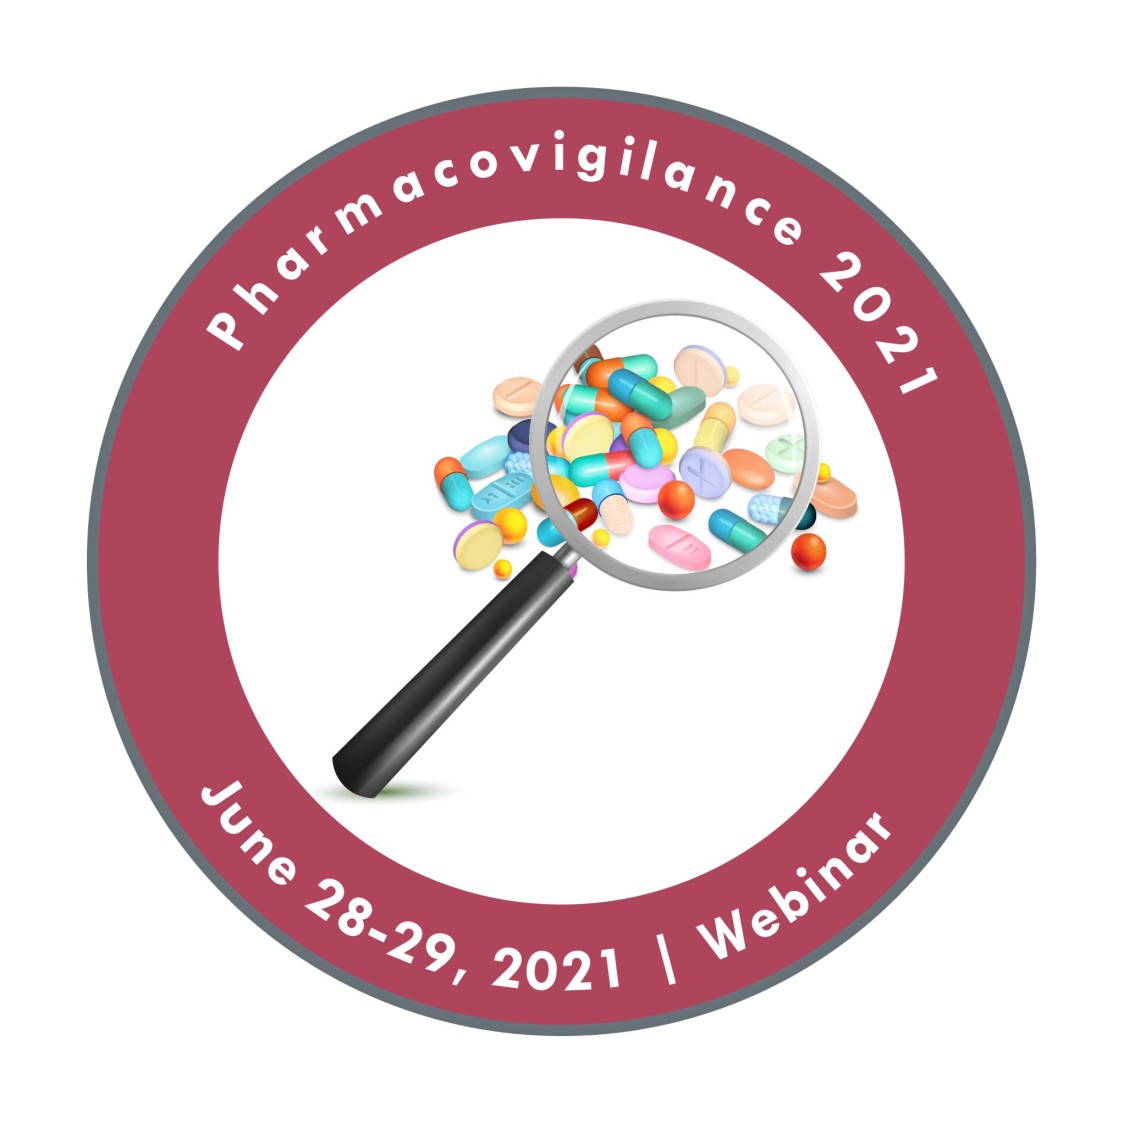 International Conference and Exhibition on Pharmacovigilance, Clinical Trials & Drug Safety